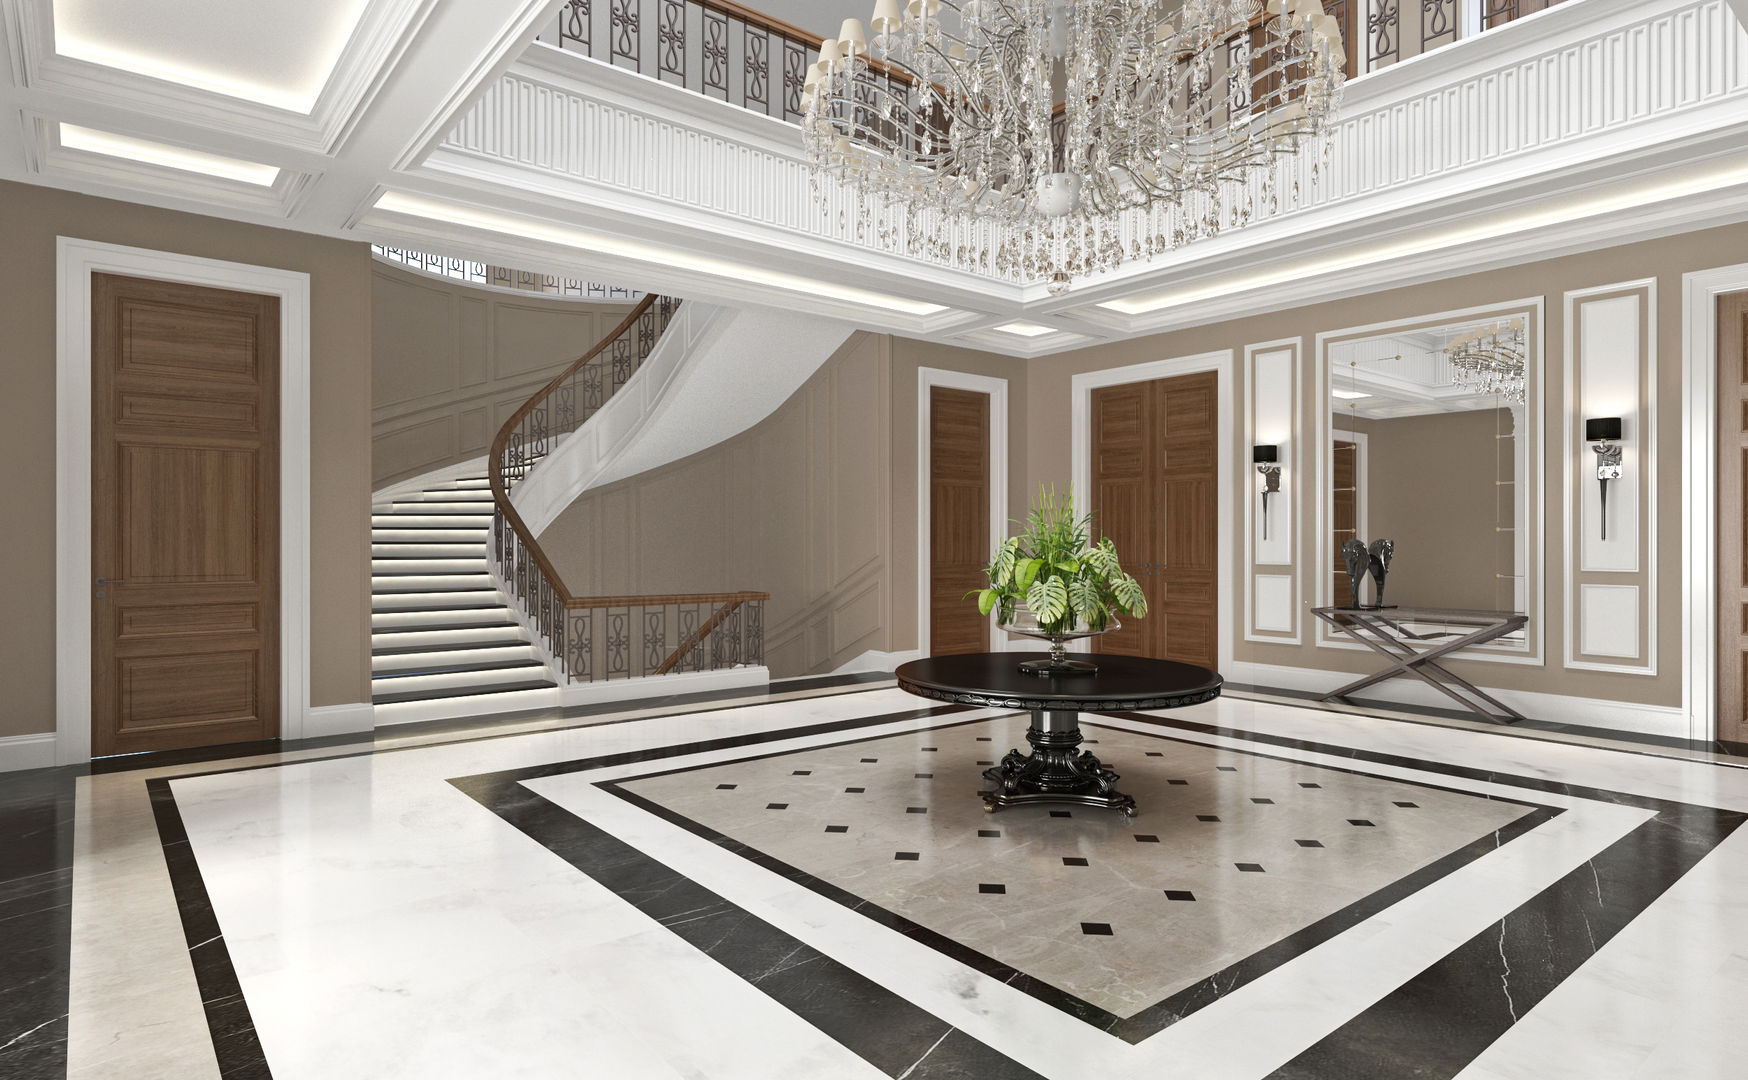 Entrance - 1 / Lake House Sia Moore Archıtecture Interıor Desıgn Eclectic style corridor, hallway & stairs Marble sia moore,turnkey project,fitout contractor,architectural,amazing,designer,design,interior design,luxury design,classical design,best design,perfect